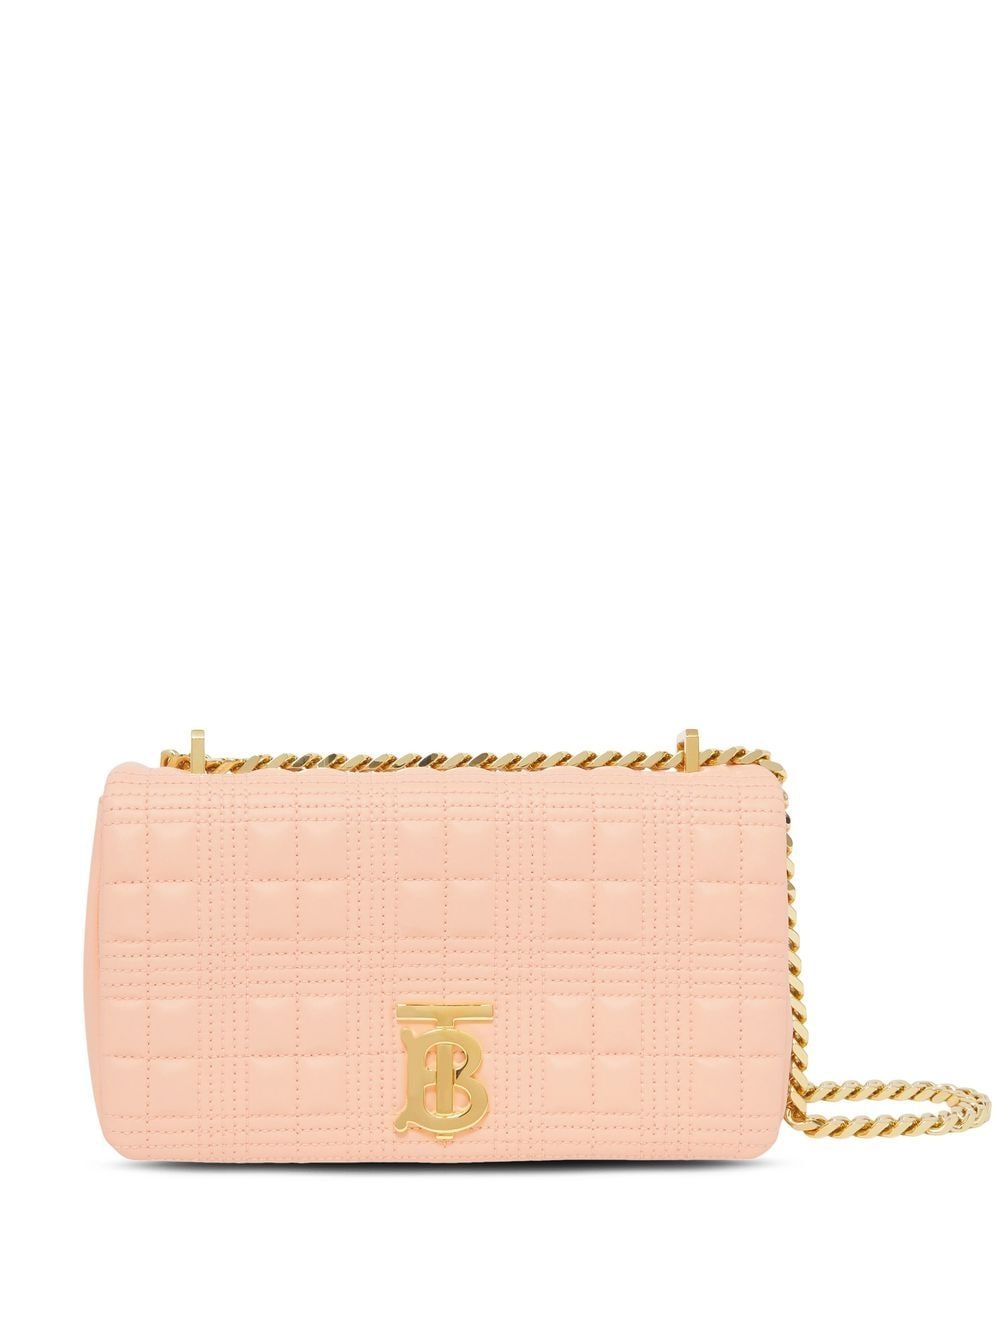 Burberry small quilted Lola bag - Pink von Burberry